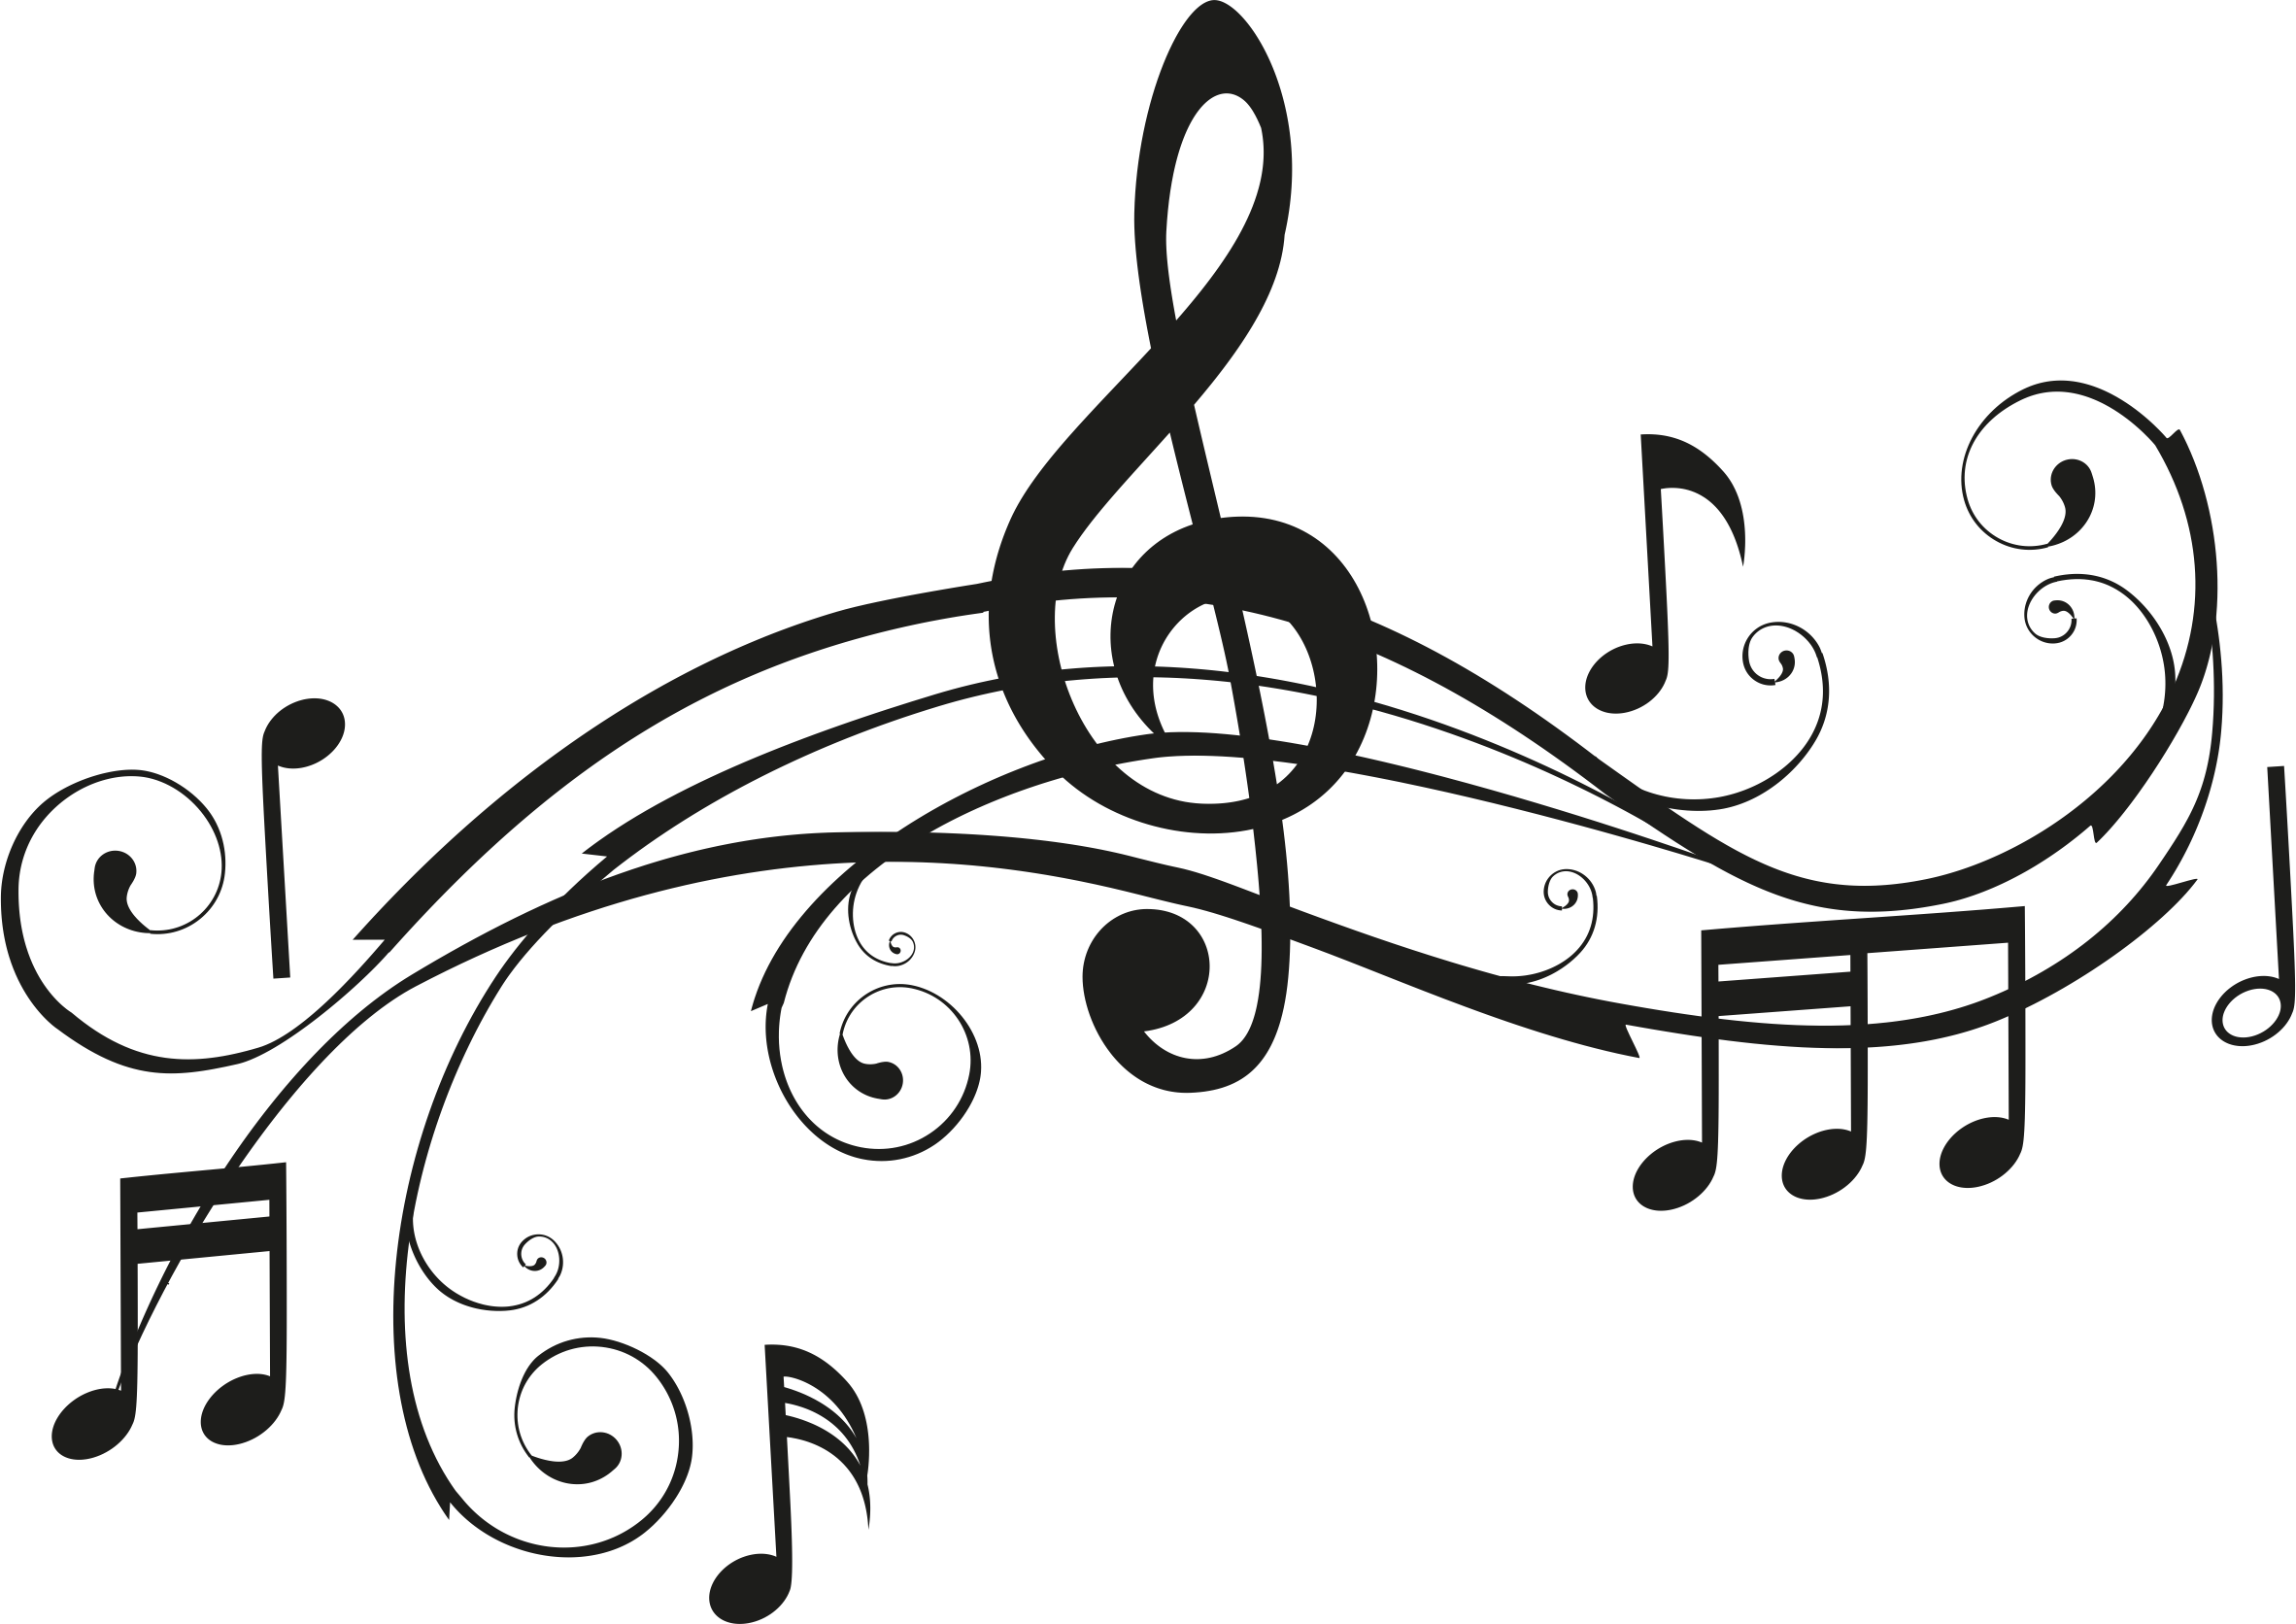 Download Music Notes Image PNG Image High Quality HQ PNG Image | FreePNGImg